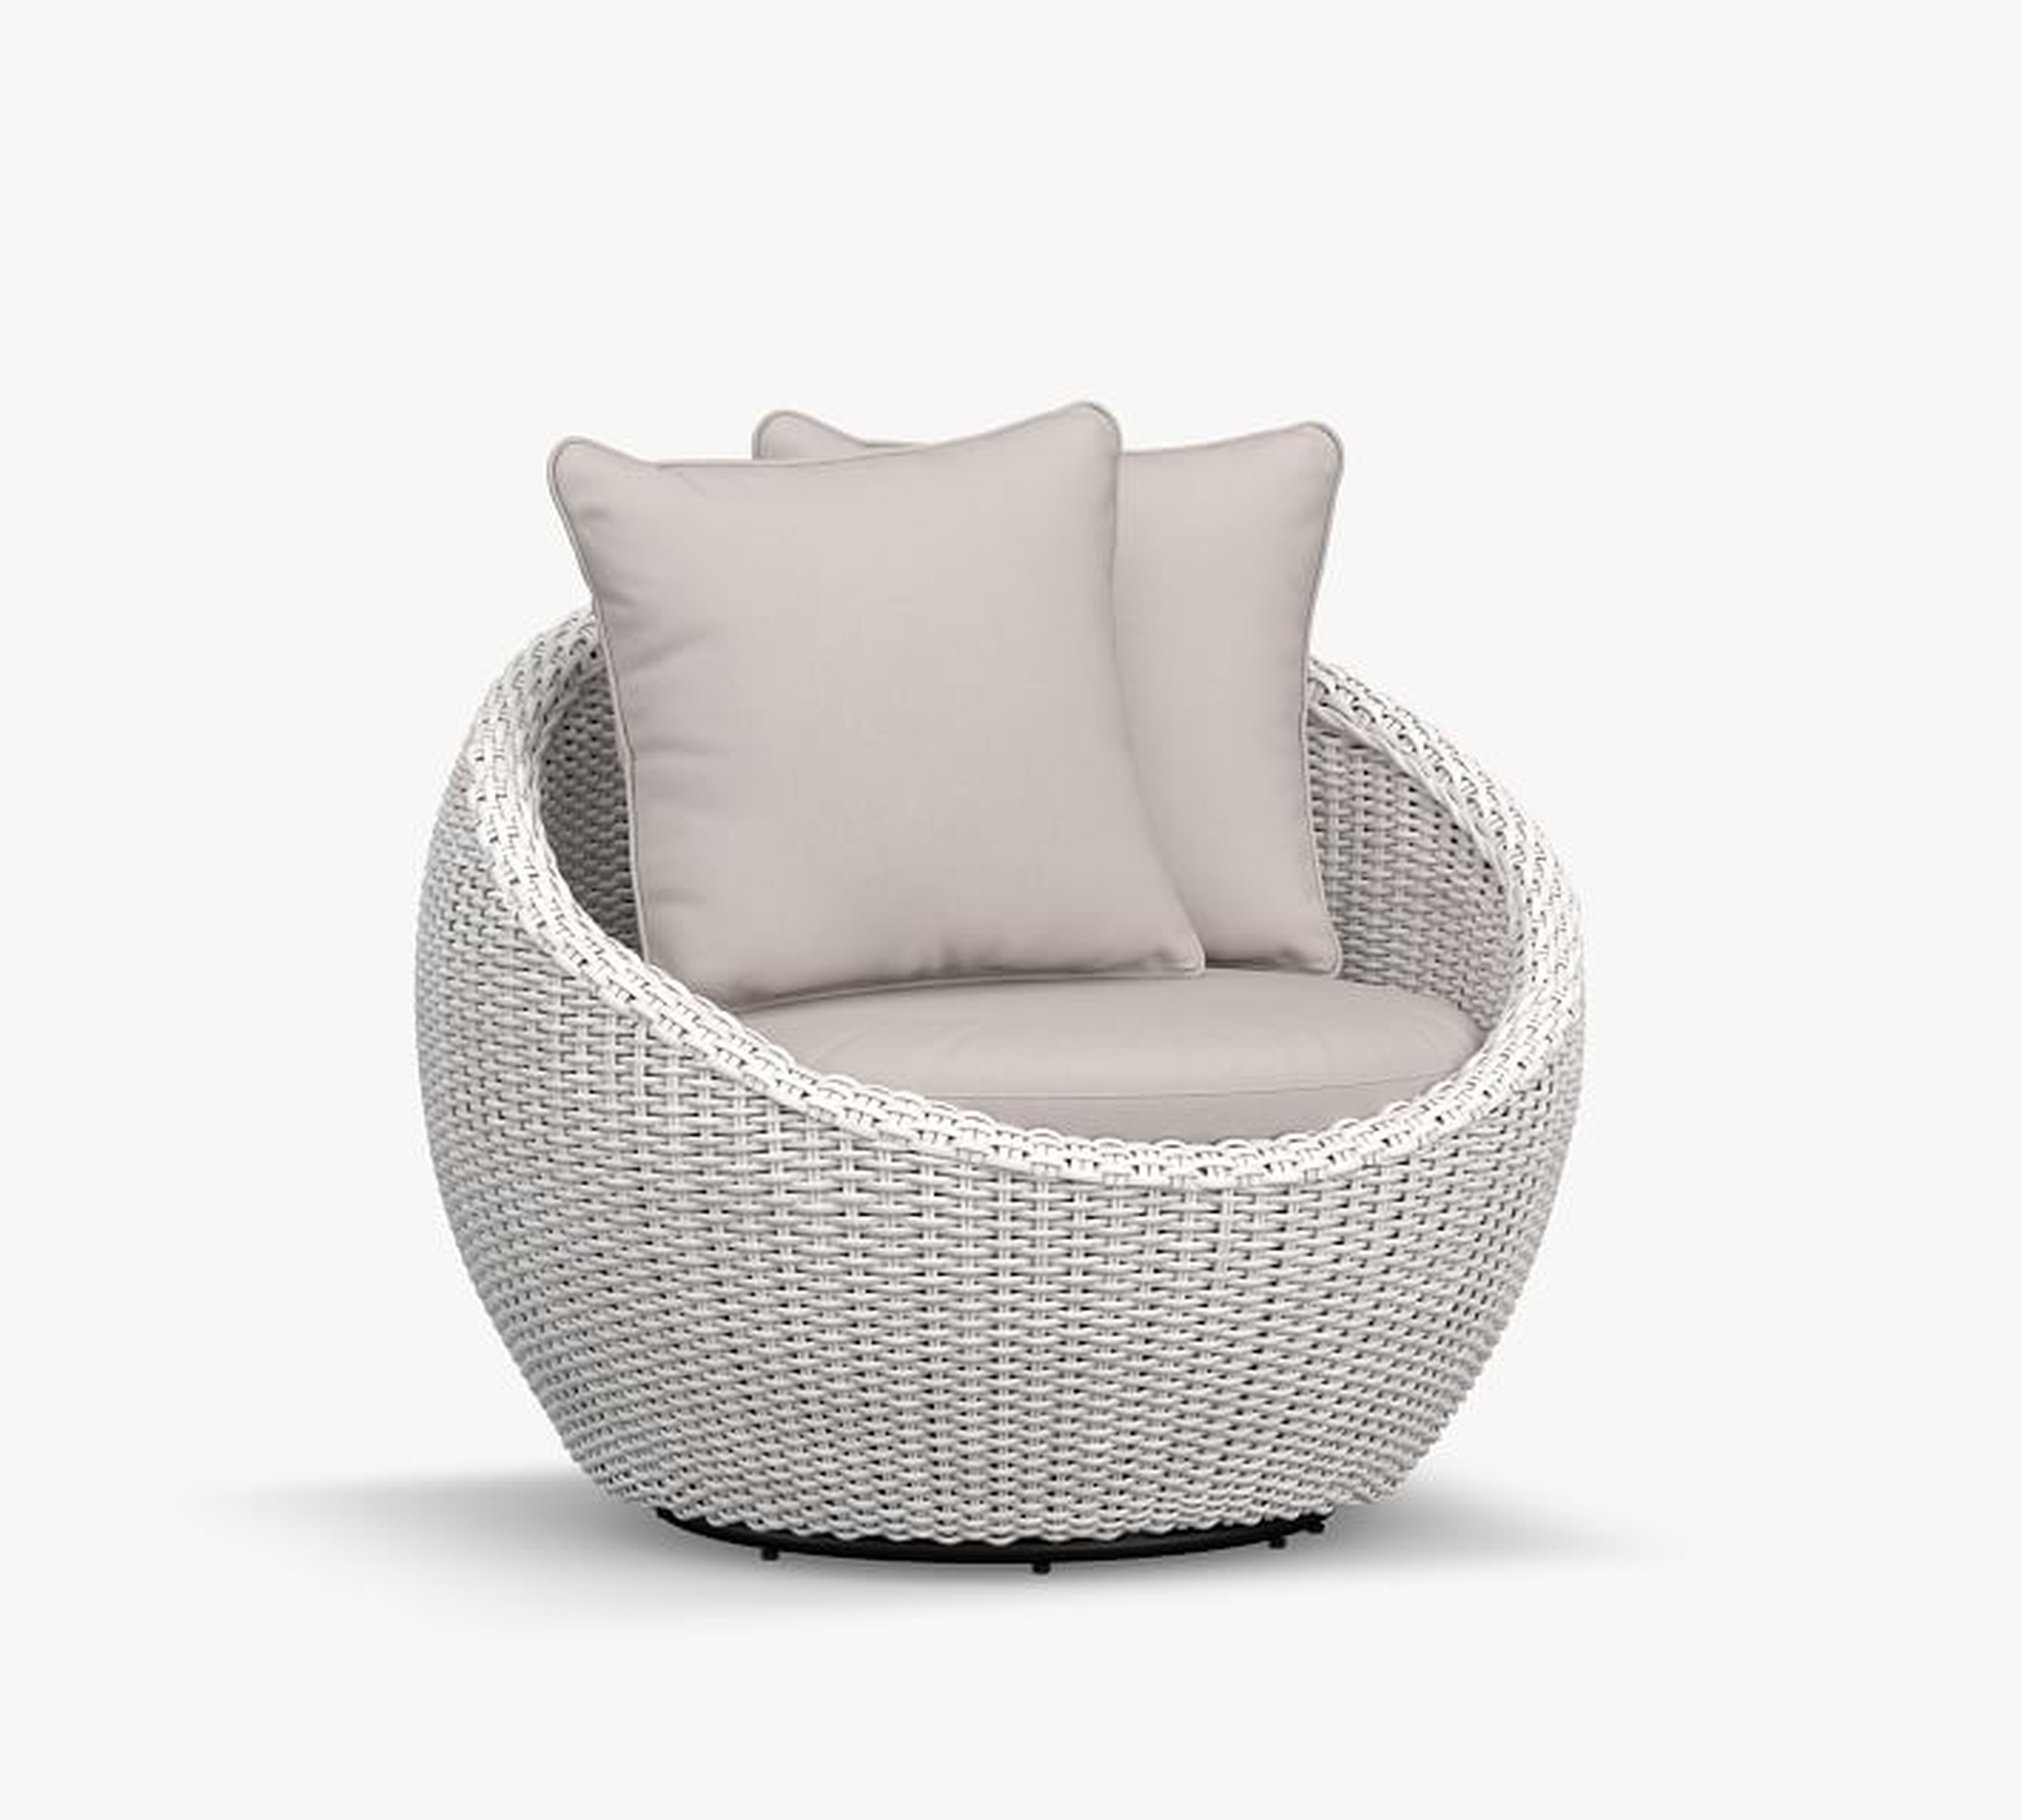 Torrey All-Weather Wicker Papasan Swivel Chair with Cushion, Natural - Pottery Barn